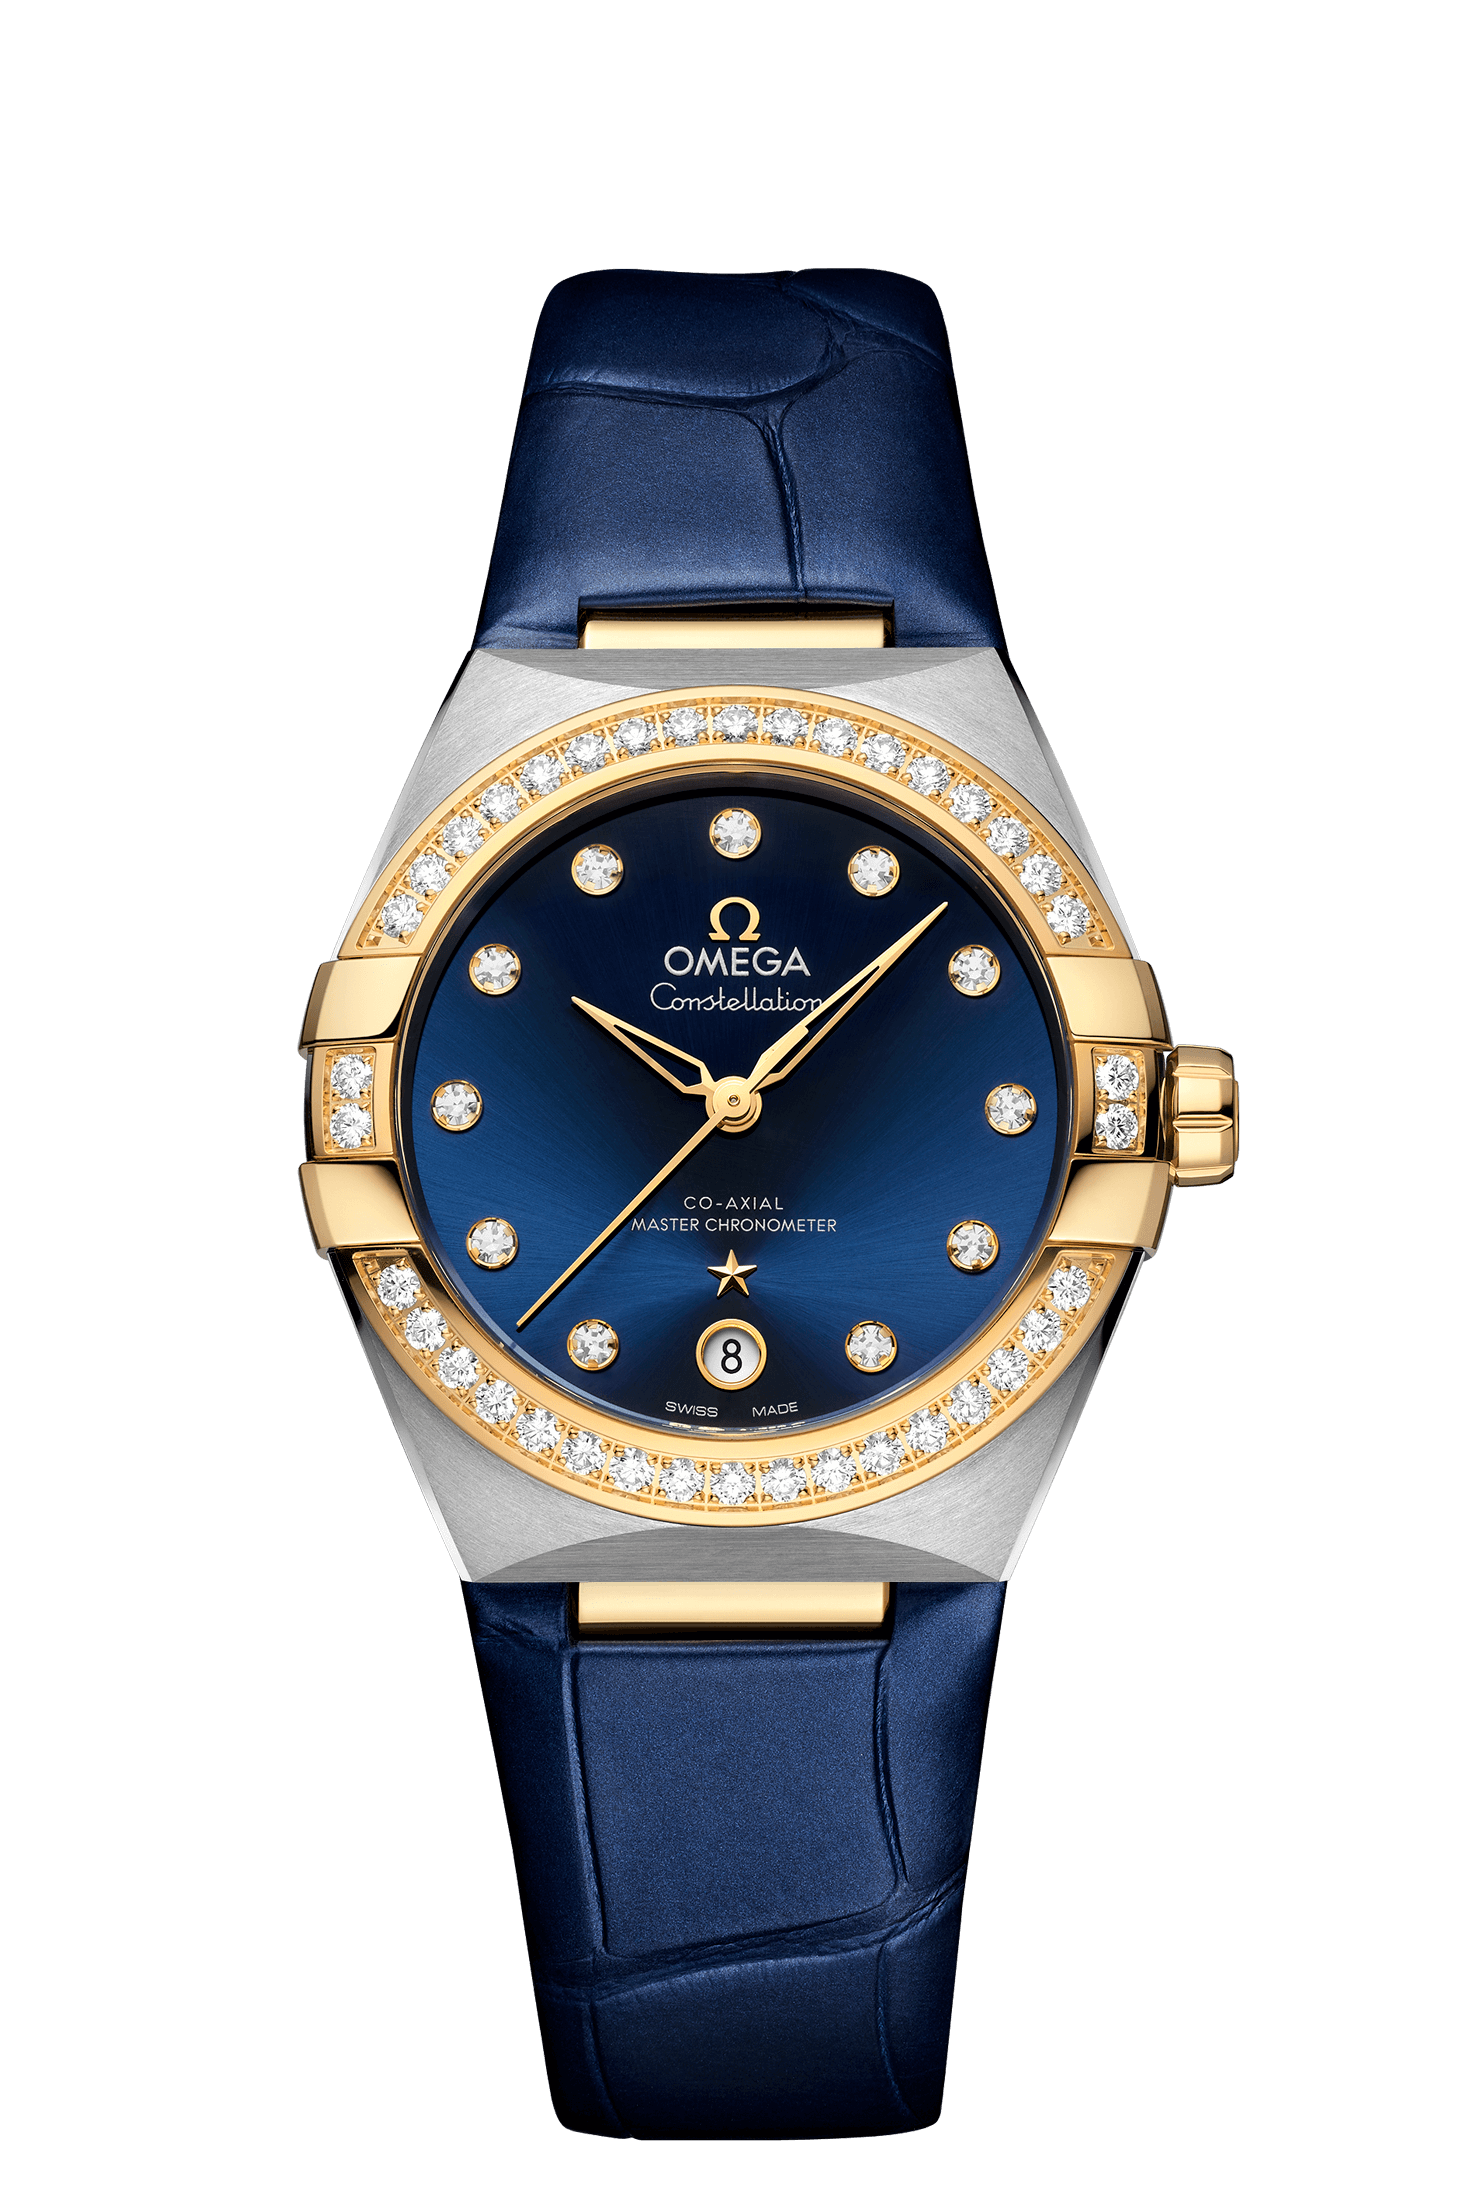 Ladies' watch  OMEGA, Constellation Co Axial Master Chronometer / 36mm, SKU: 131.28.36.20.53.001 | watchapproach.com